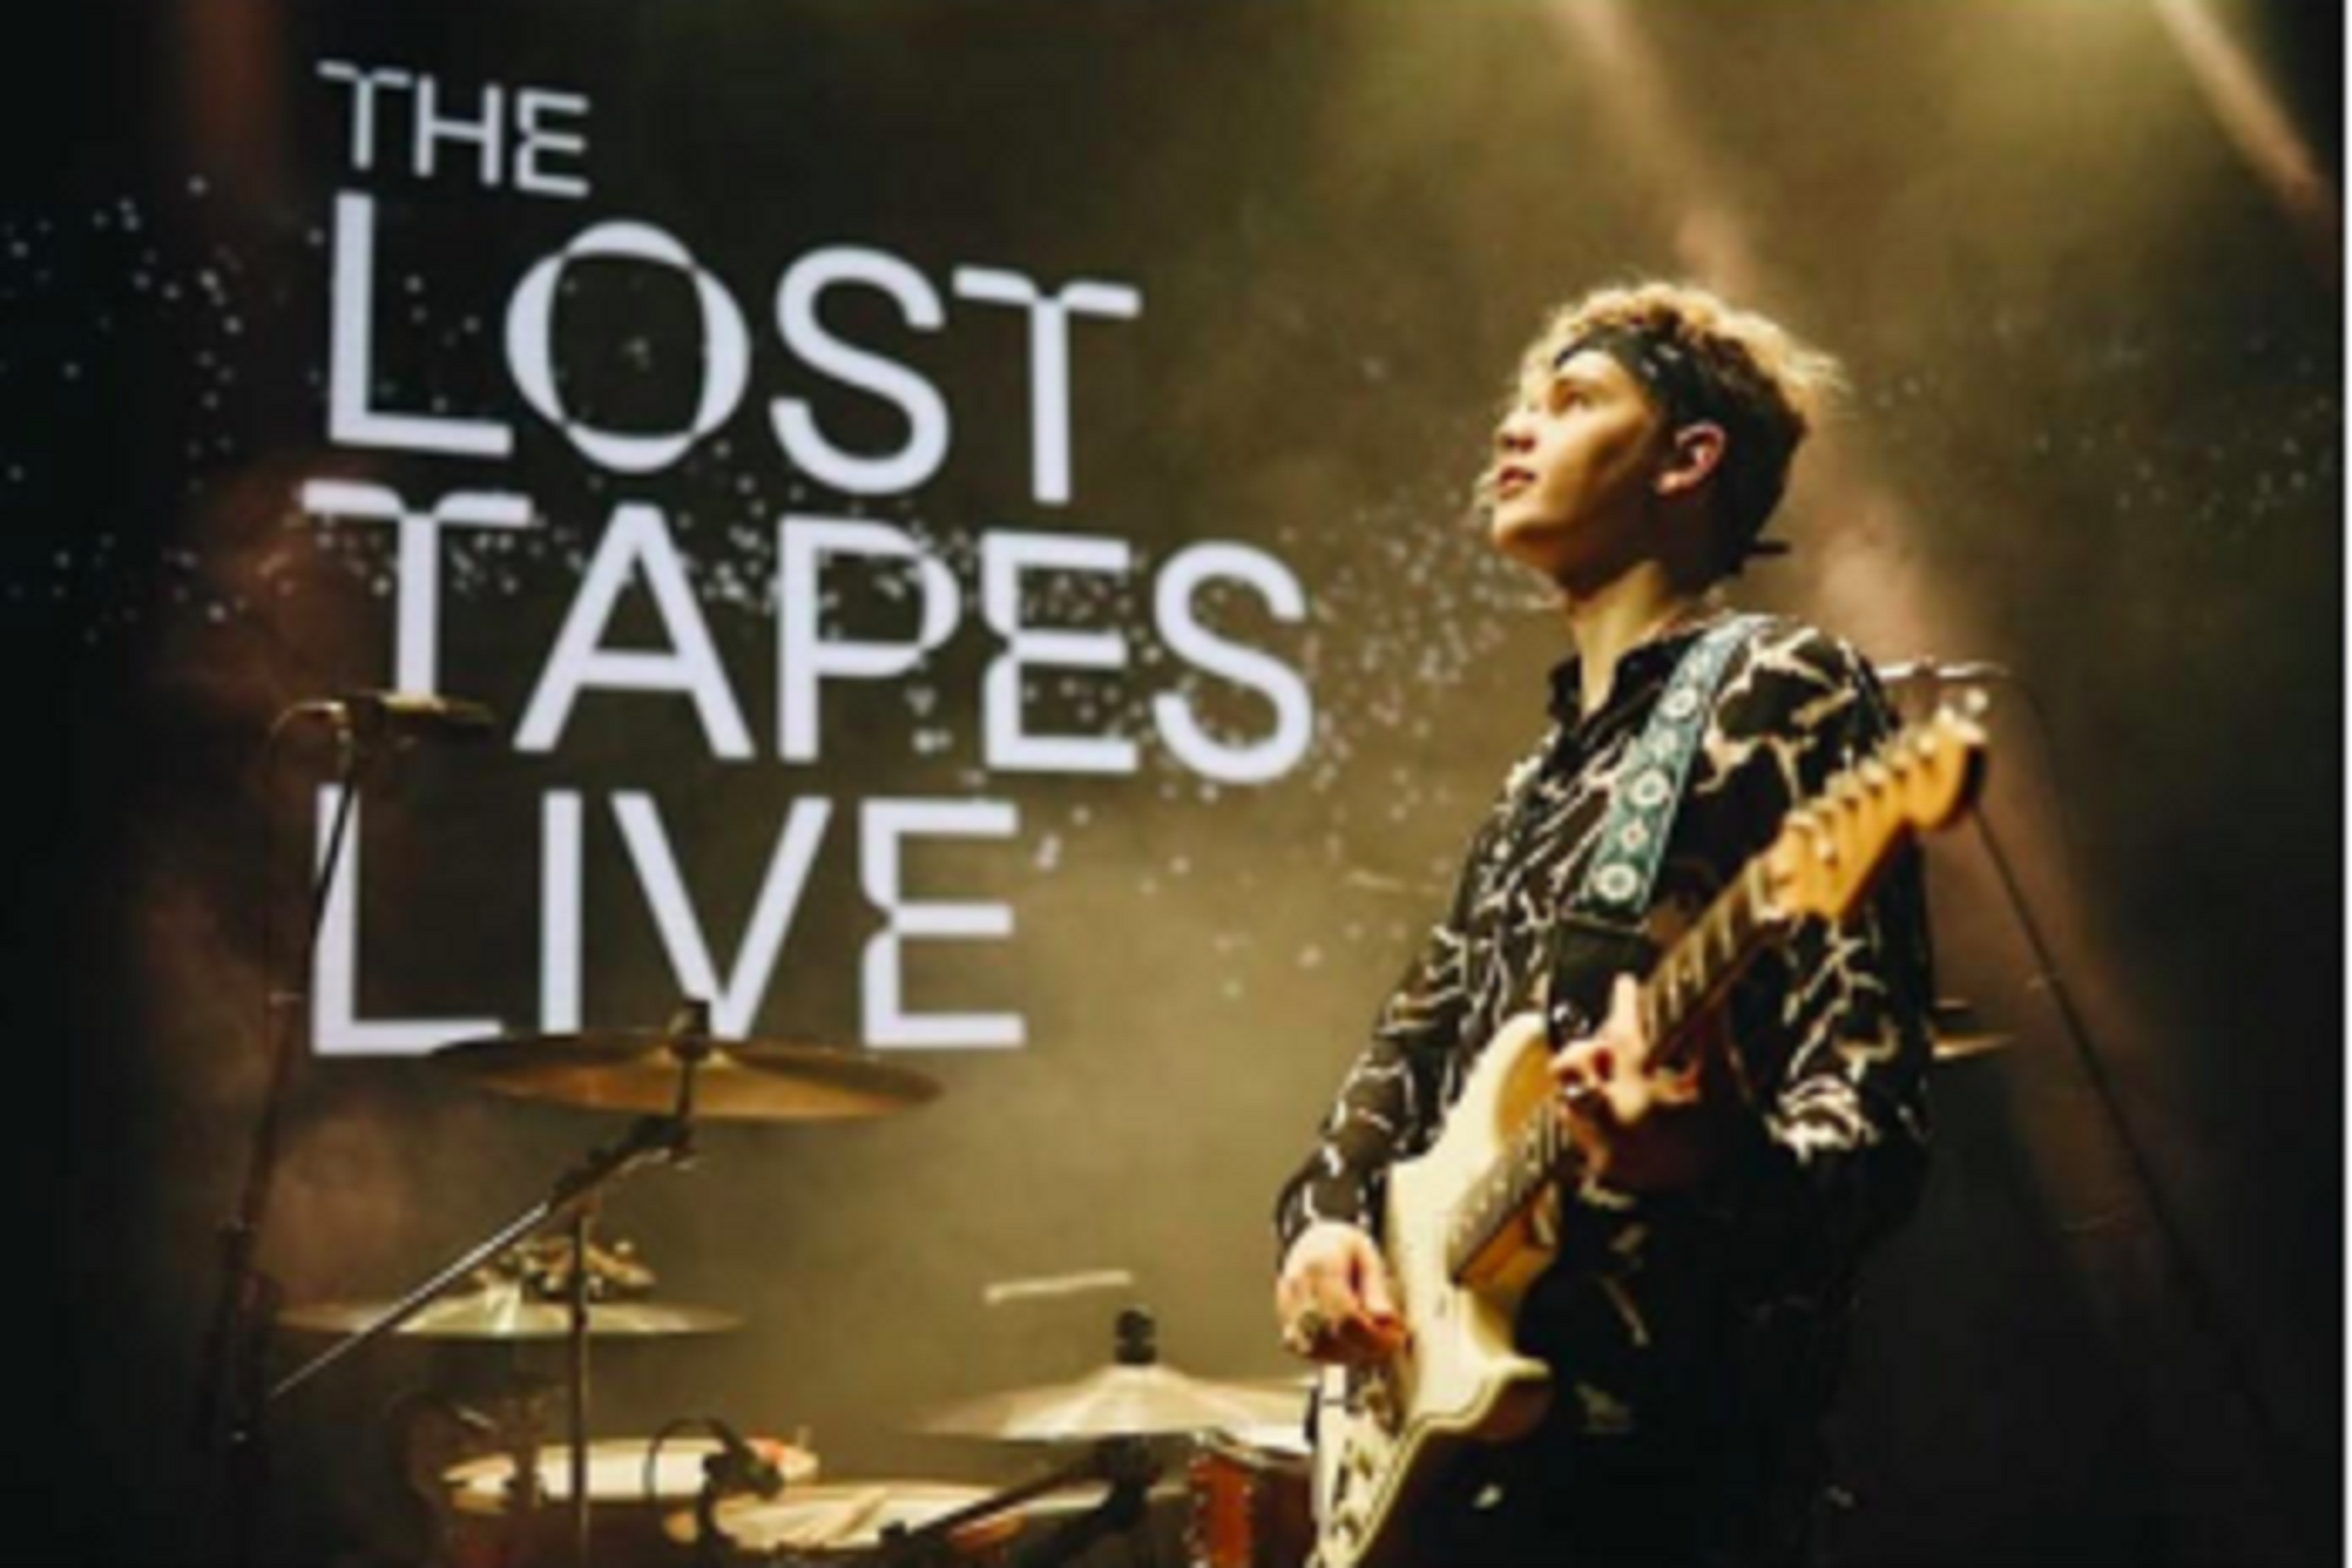 “The Lost Tapes Live” sees artists and mental health advocates come together to fight for mental health